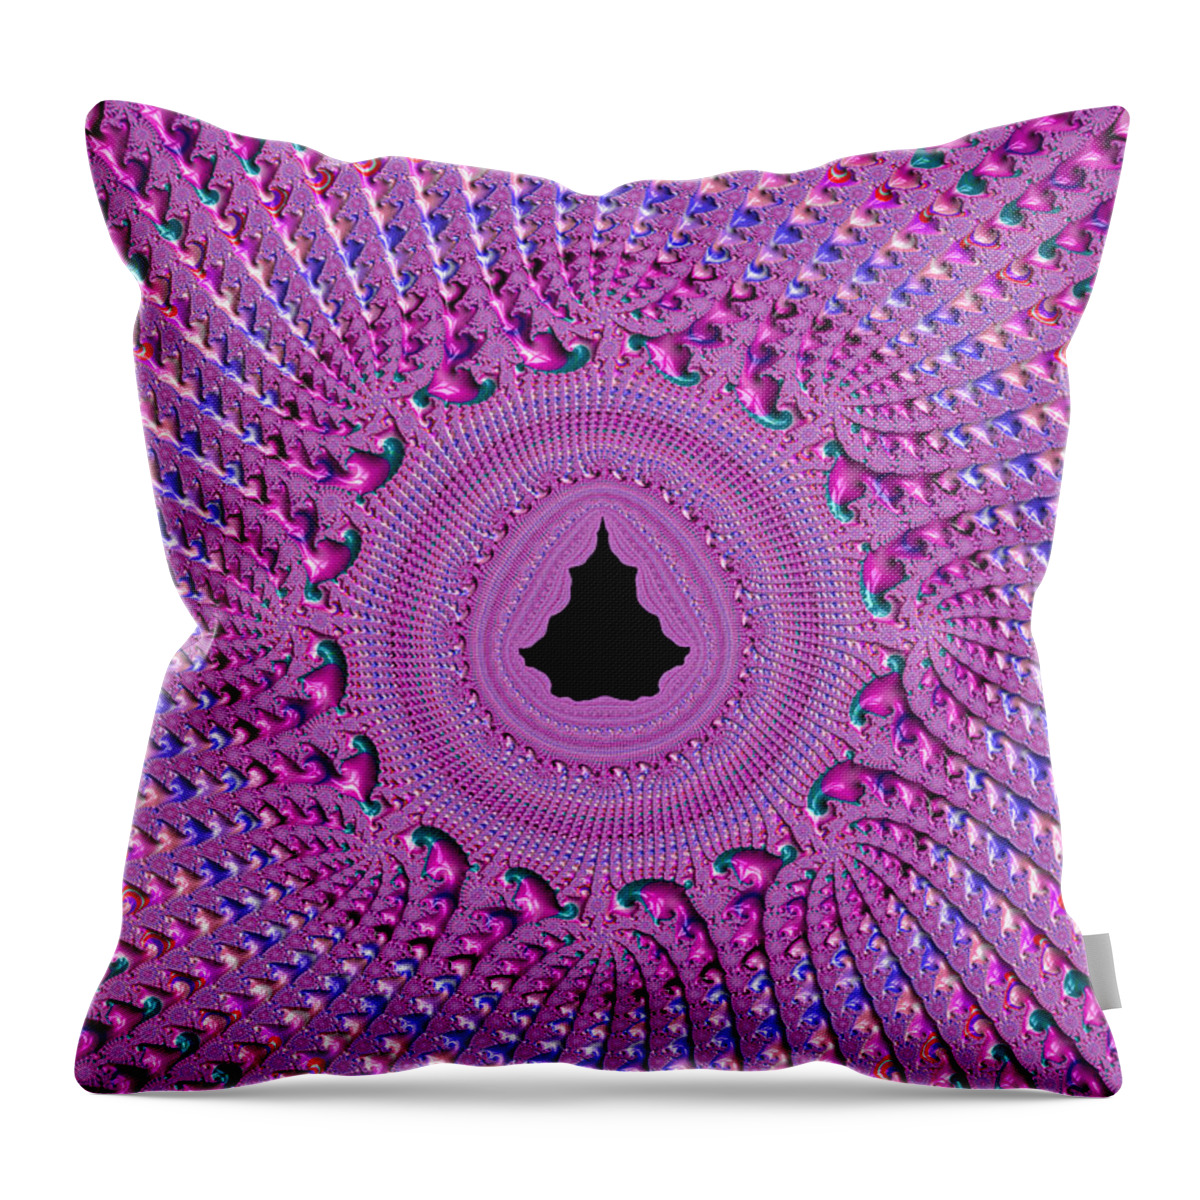 Pattern Throw Pillow featuring the digital art Pink and purple fractal crochet ornaments by Matthias Hauser